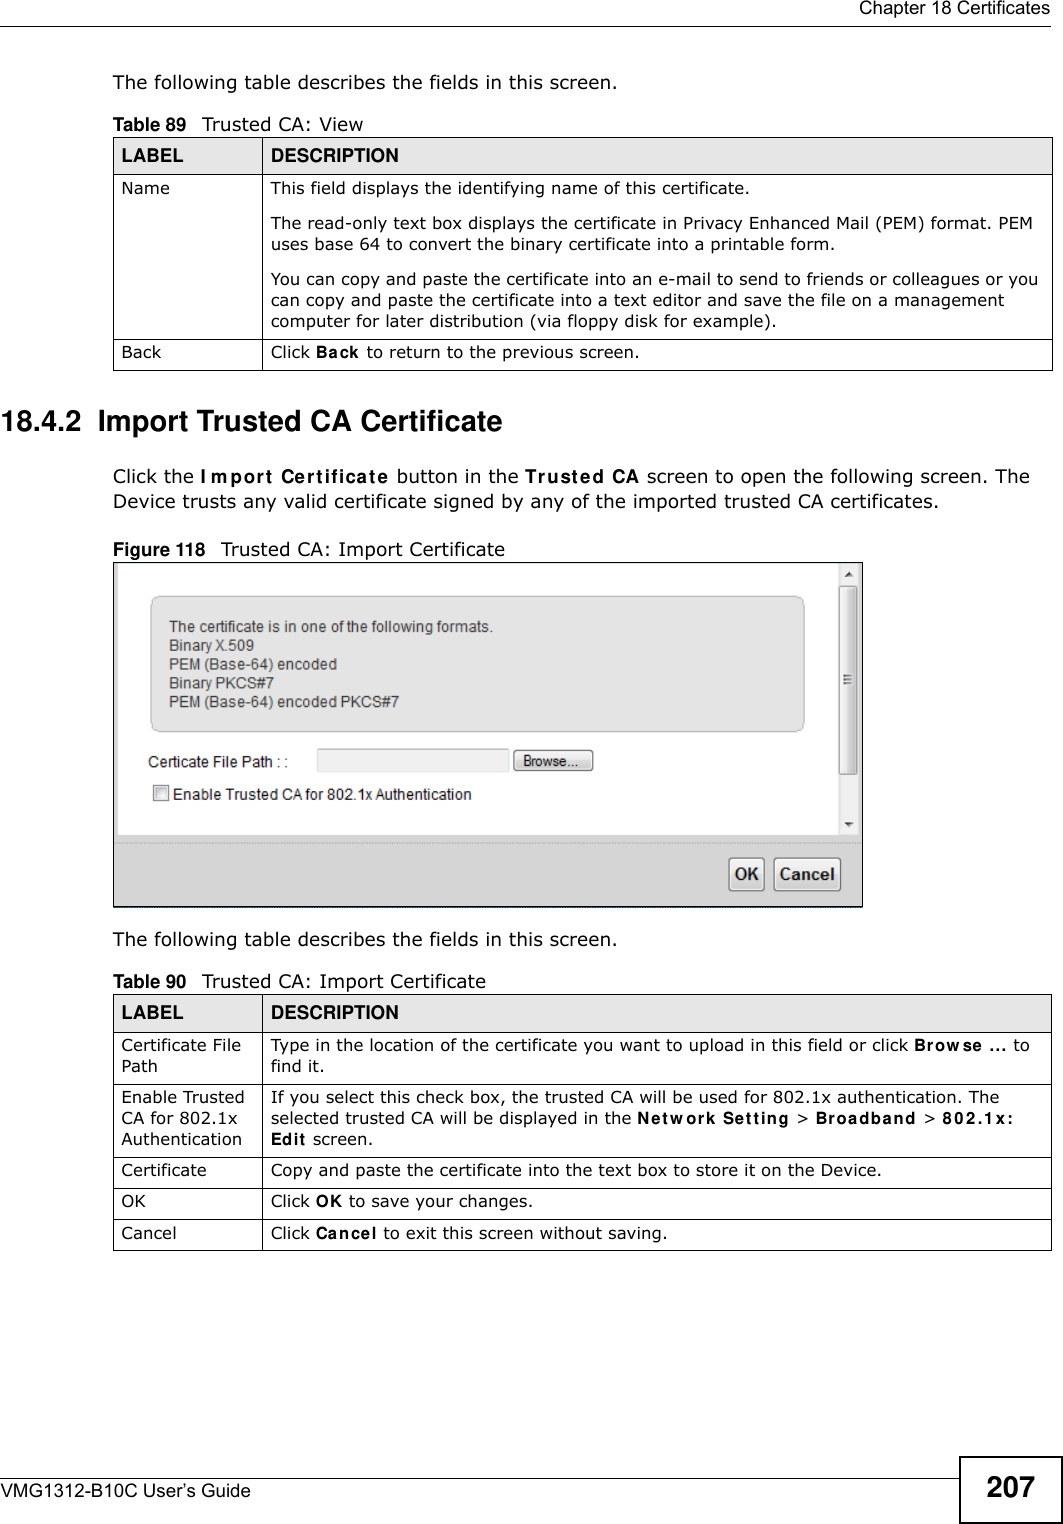  Chapter 18 CertificatesVMG1312-B10C User’s Guide 207The following table describes the fields in this screen. 18.4.2  Import Trusted CA CertificateClick the I m por t  Cer t ificat e button in the Tr u st ed CA screen to open the following screen. The Device trusts any valid certificate signed by any of the imported trusted CA certificates.Figure 118   Trusted CA: Import Certificate The following table describes the fields in this screen. Table 89   Trusted CA: ViewLABEL DESCRIPTIONName This field displays the identifying name of this certificate. The read-only text box displays the certificate in Privacy Enhanced Mail (PEM) format. PEM uses base 64 to convert the binary certificate into a printable form. You can copy and paste the certificate into an e-mail to send to friends or colleagues or you can copy and paste the certificate into a text editor and save the file on a management computer for later distribution (via floppy disk for example).Back Click Back  to return to the previous screen.Table 90   Trusted CA: Import CertificateLABEL DESCRIPTIONCertificate File PathType in the location of the certificate you want to upload in this field or click Brow se  ... to find it. Enable Trusted CA for 802.1x AuthenticationIf you select this check box, the trusted CA will be used for 802.1x authentication. The selected trusted CA will be displayed in the N et w ork Set t in g &gt; Br oa d ba n d &gt; 8 0 2 .1 x : Edit  screen.Certificate Copy and paste the certificate into the text box to store it on the Device.OK Click OK to save your changes.Cancel Click Cancel to exit this screen without saving.